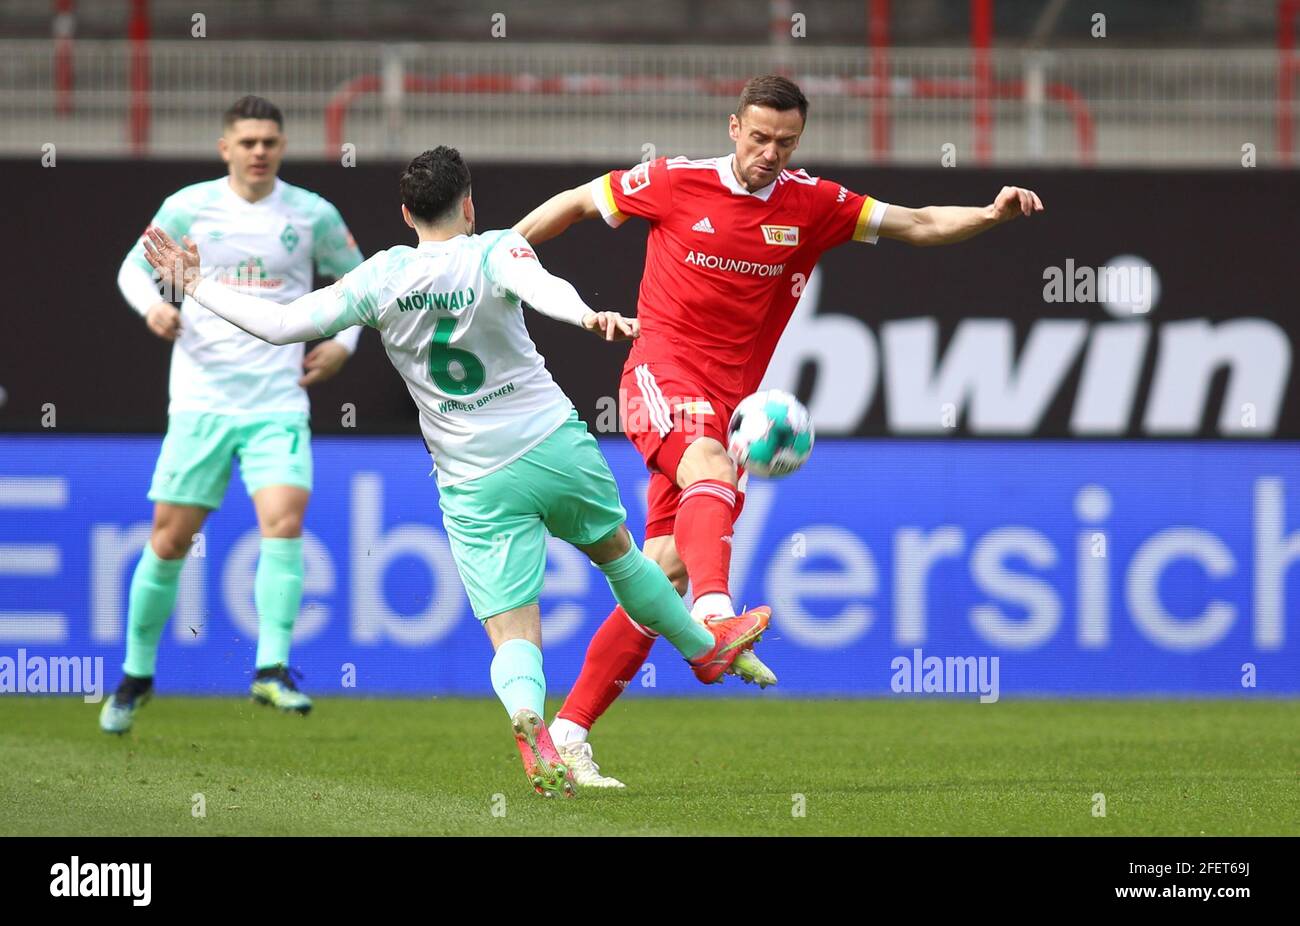 Berlin, Germany. 24th Apr, 2021. Football: Bundesliga, 1. FC Union Berlin - Werder Bremen, Matchday 31 at Stadion An der Alten Försterei. Union's Christian Gentner (r) and Bremen's Kevin Möhwald fight for the ball. IMPORTANT NOTE: In accordance with the regulations of the DFL Deutsche Fußball Liga and the DFB Deutscher Fußball-Bund, it is prohibited to use or have used photographs taken in the stadium and/or of the match in the form of sequence pictures and/or video-like photo series. Credit: Andreas Gora/dpa-Pool/dpa/Alamy Live News Stock Photo